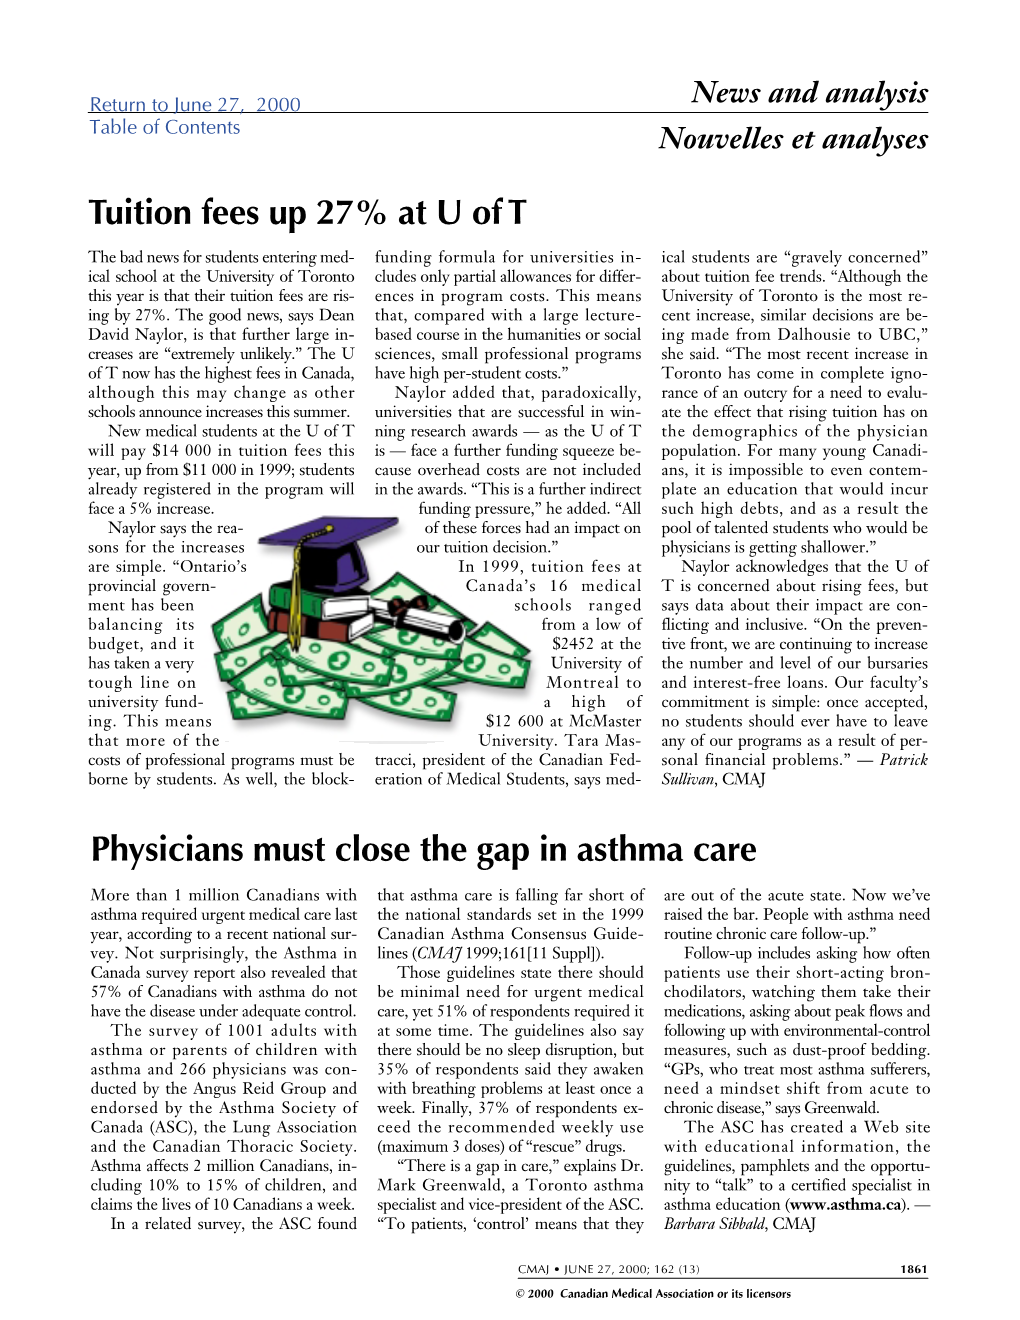 Tuition Fees up 27% at U of T Physicians Must Close the Gap In